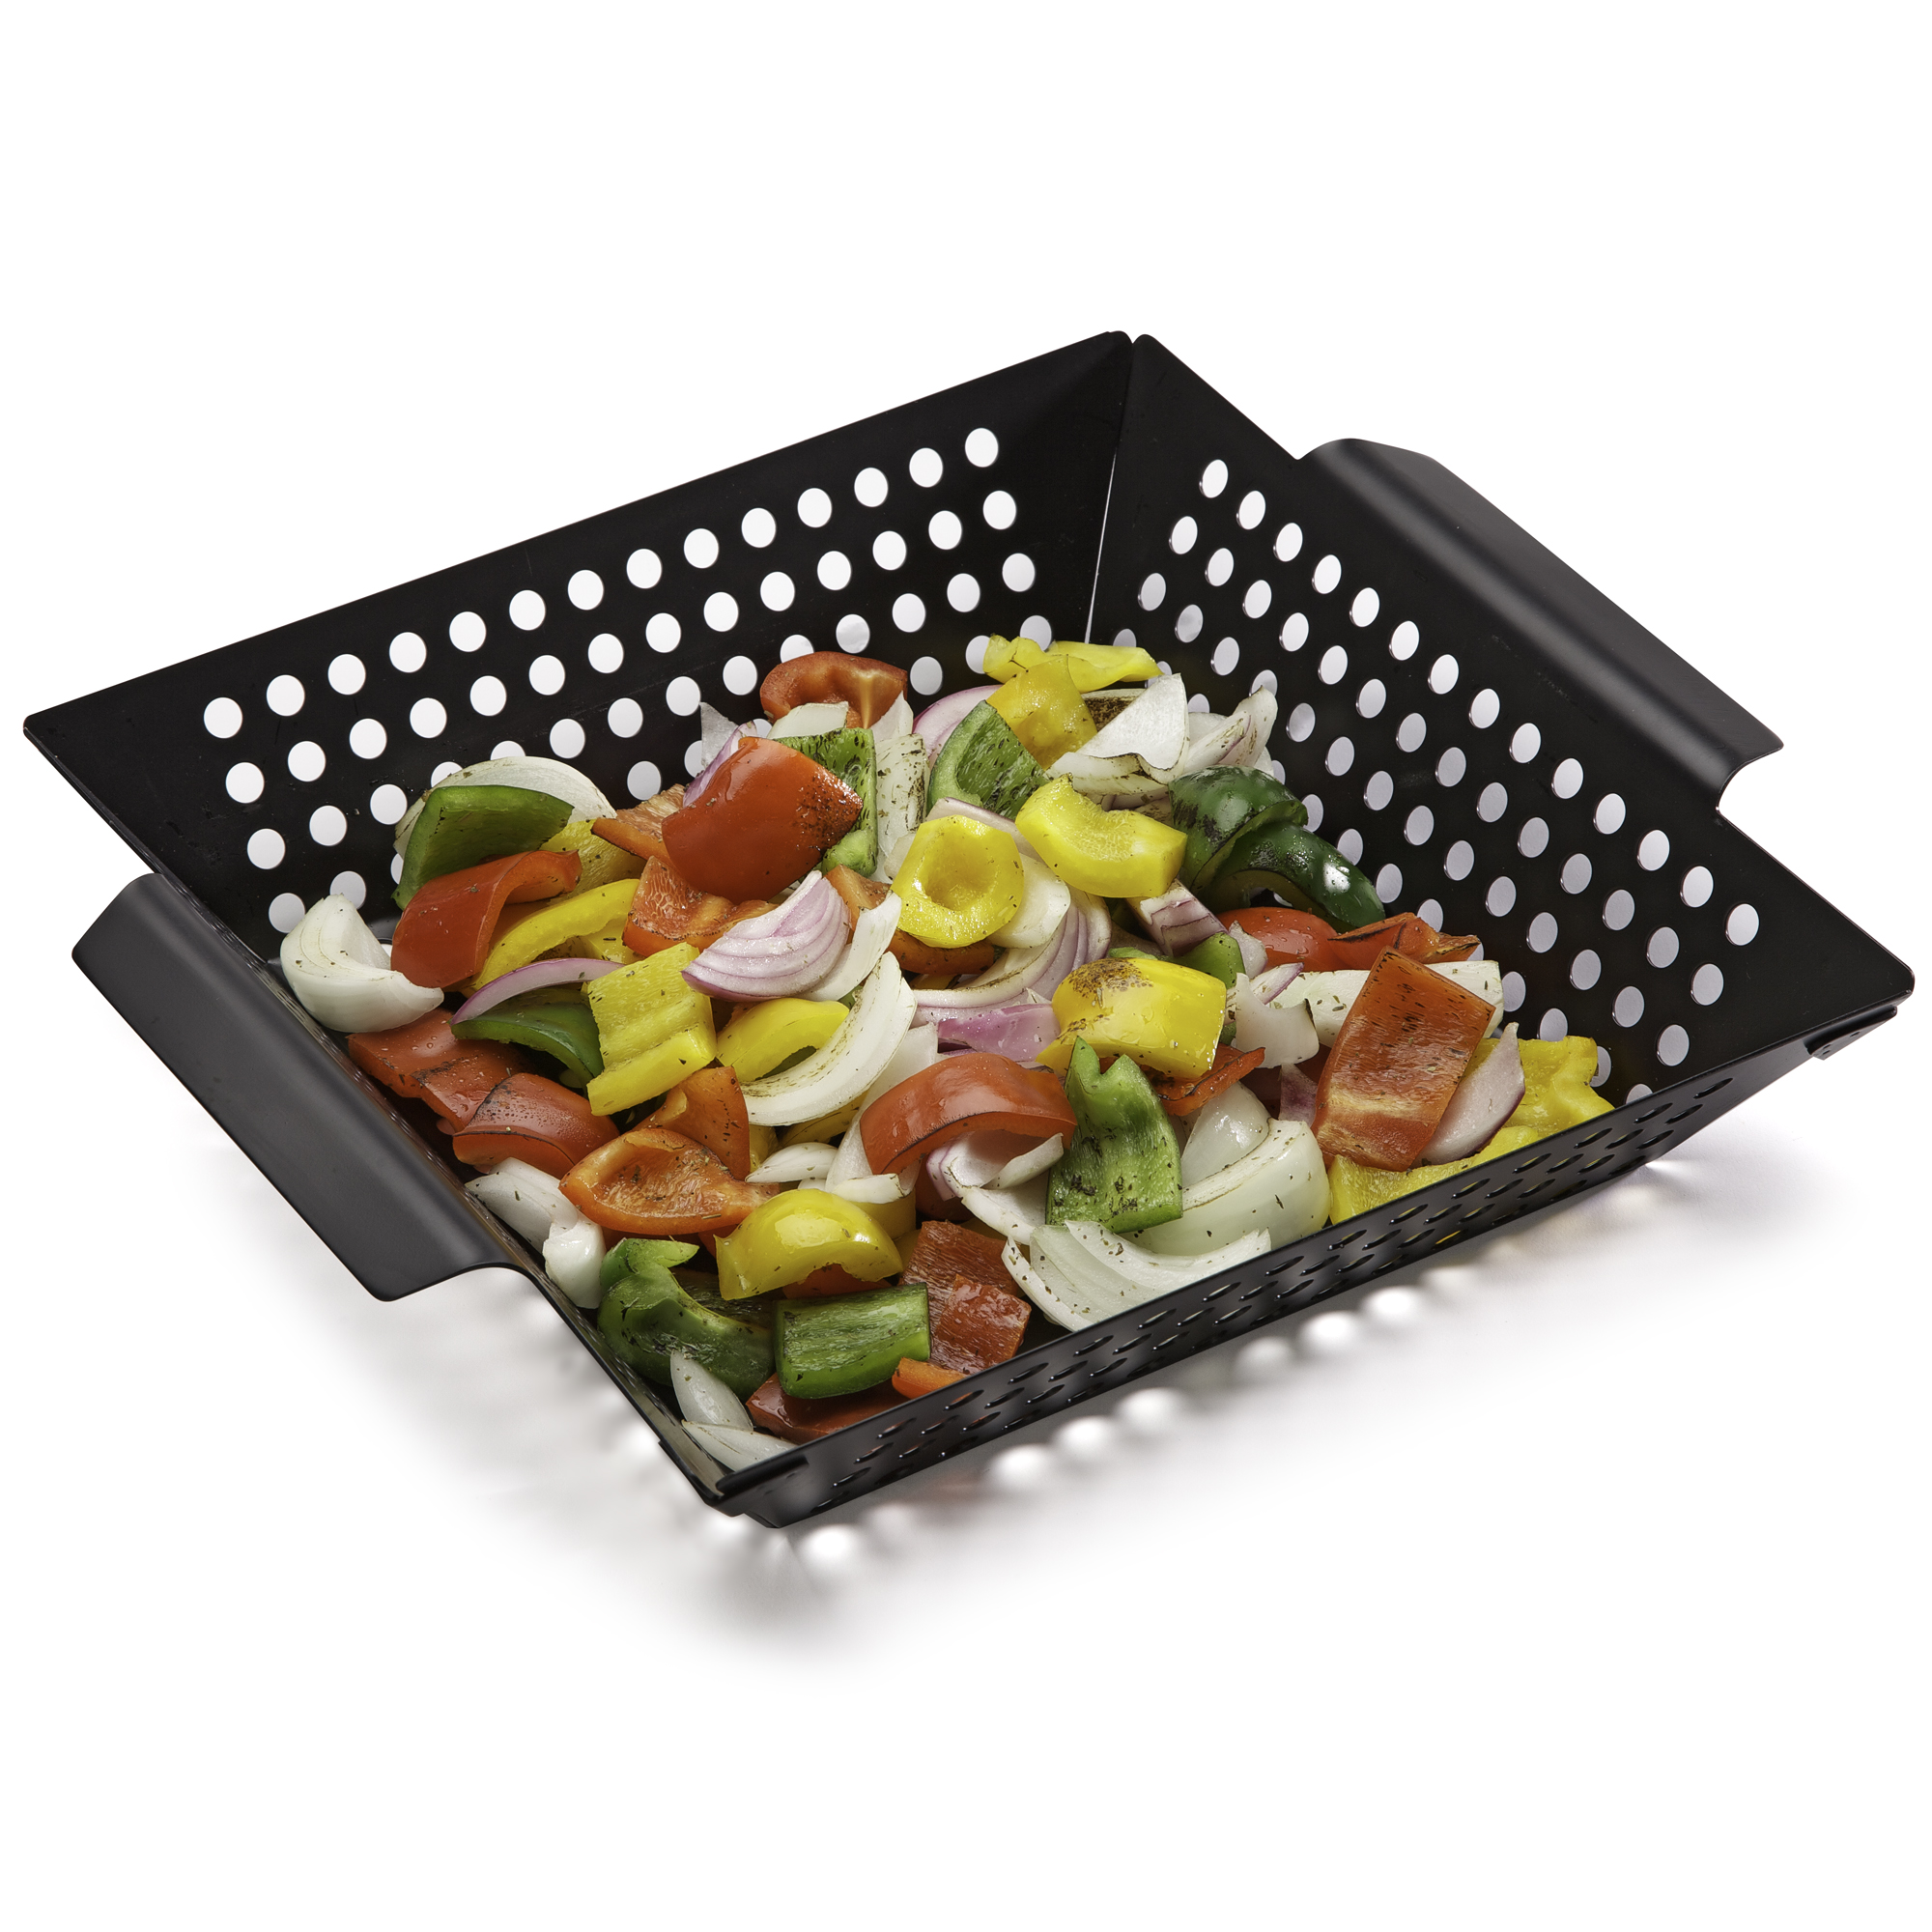 Cuisinart® Non-Stick Grill Wok - 11 Inch x 11 Inch, Grilling Basket, Perfect for Seafood and Vegetables - image 2 of 3